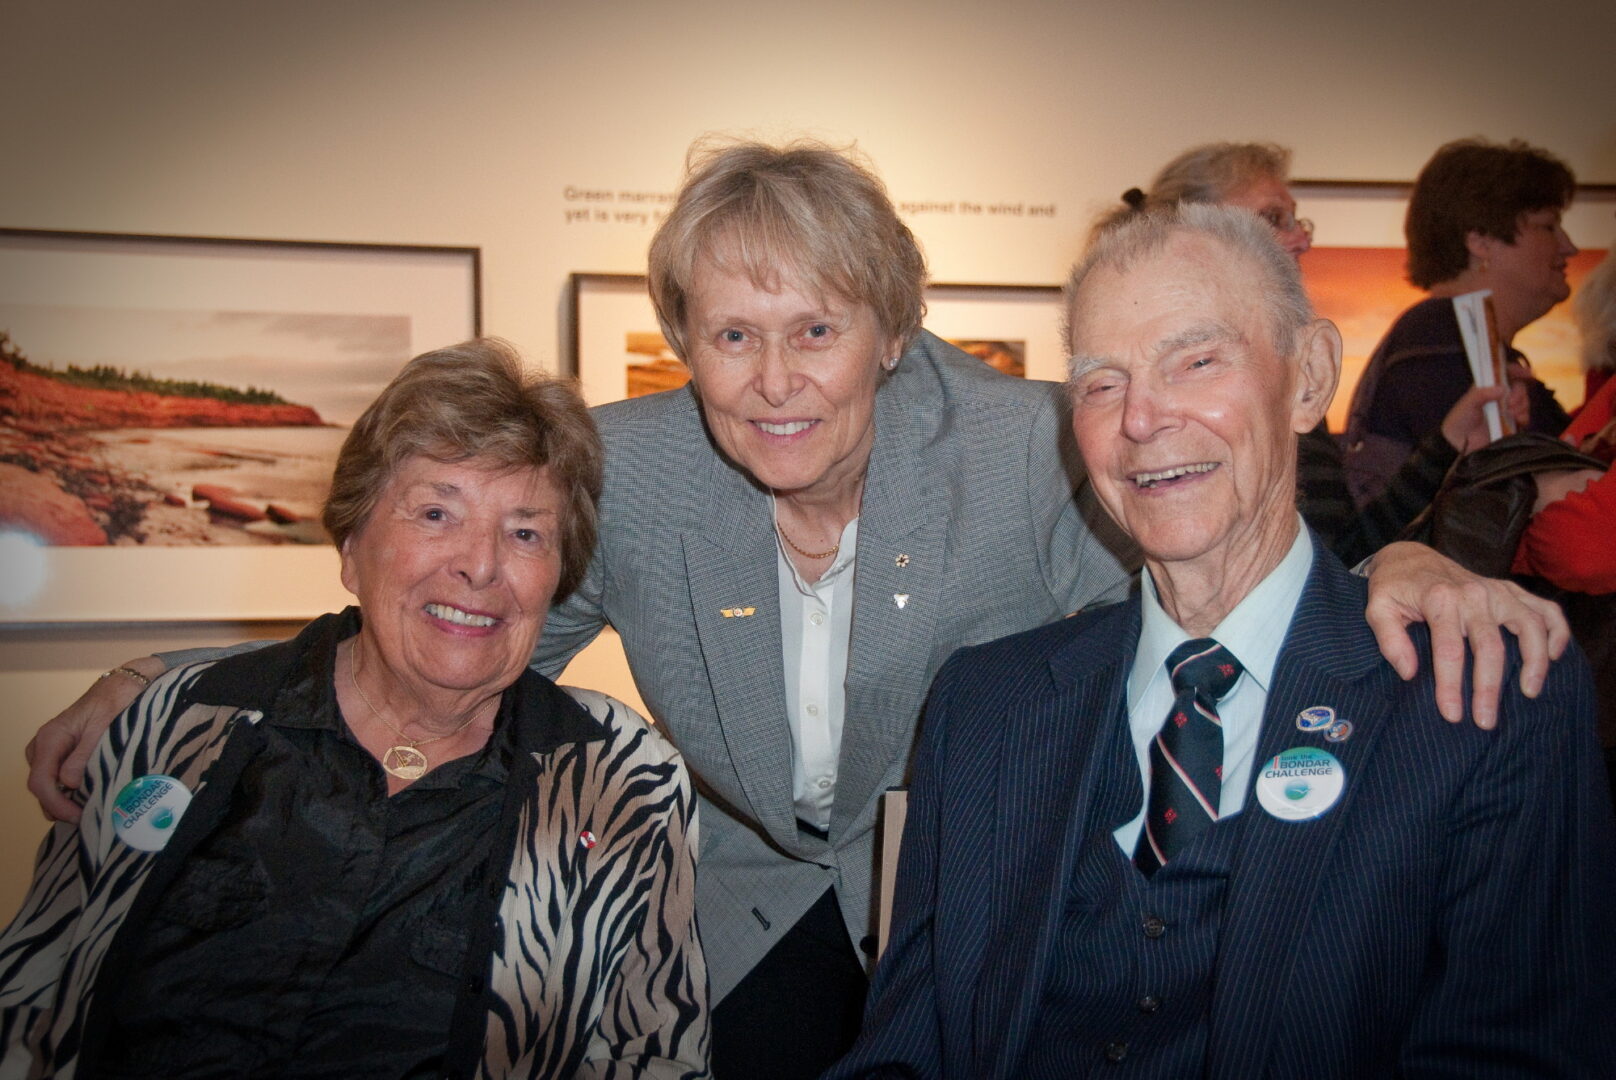 Dr Betty Roots, Dr Roberta Bondar and George Constable